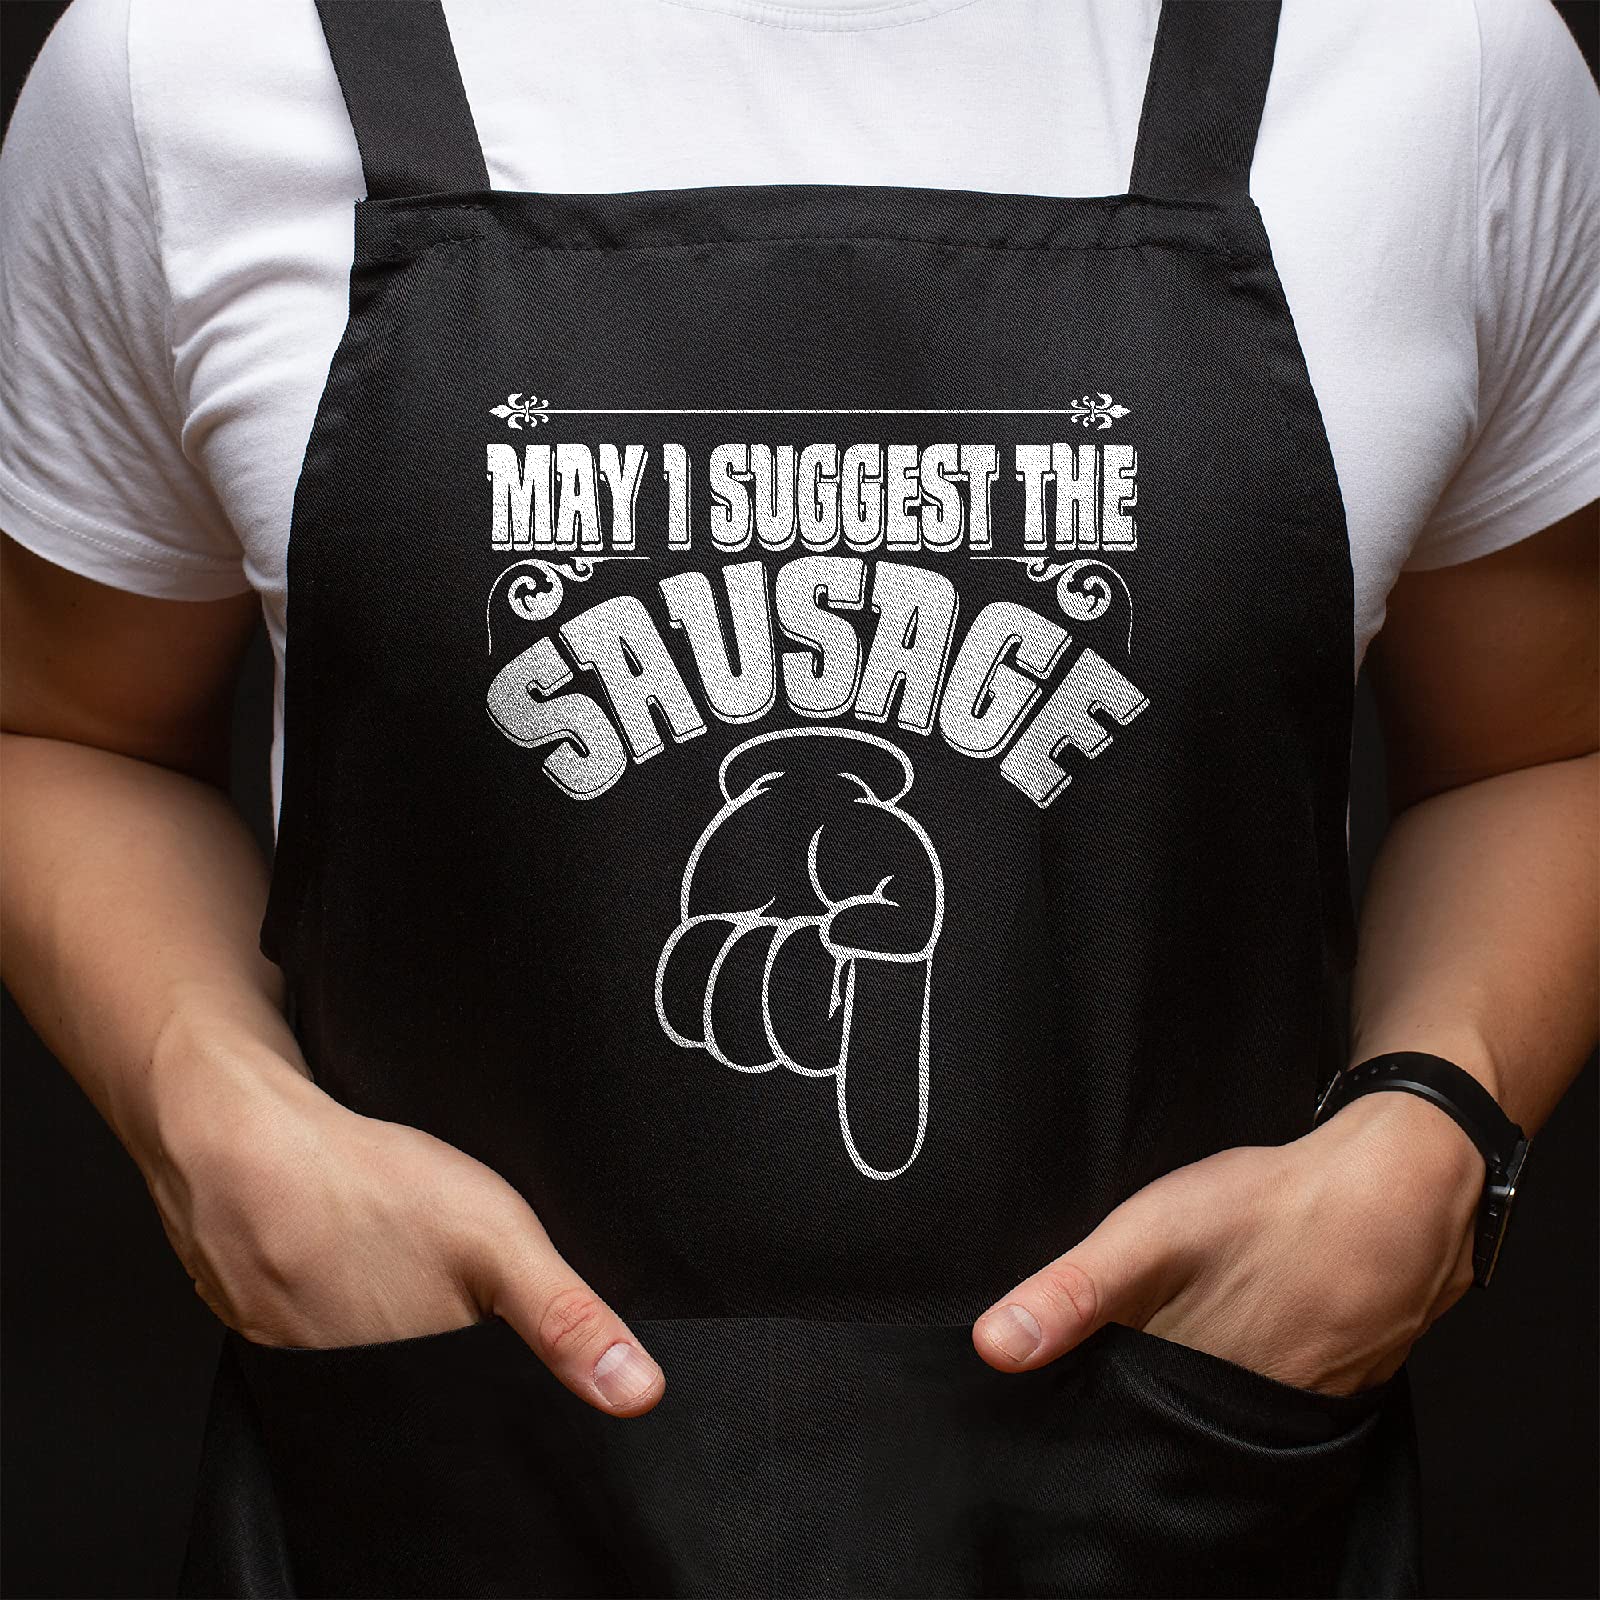 Bang Tidy Clothing Funny Apron Cooking Gifts for Men, Grilling BBQ Grill Cooks Chef Aprons 2 Pockets Cotton, Dad Gifts